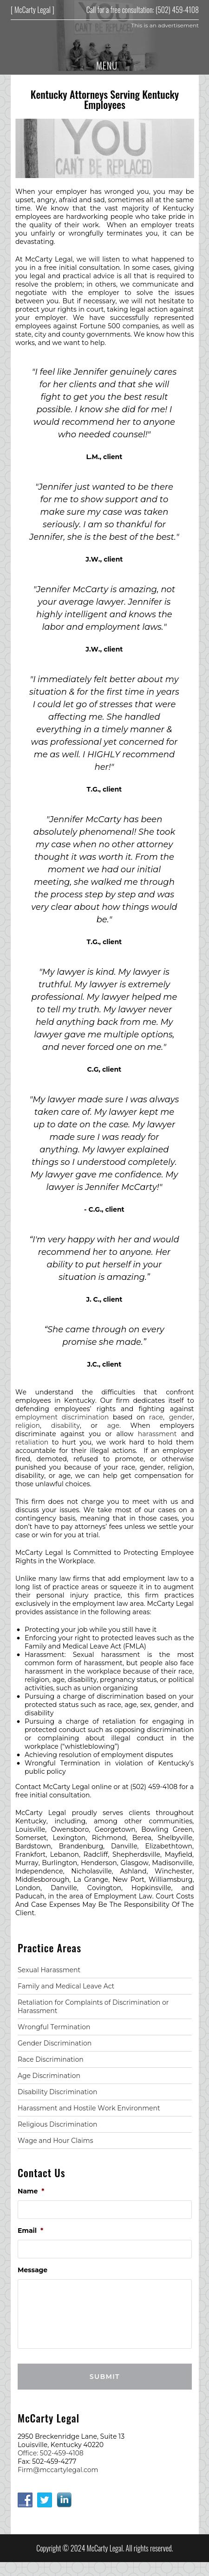 Abney & McCarty PLLC - Louisville KY Lawyers